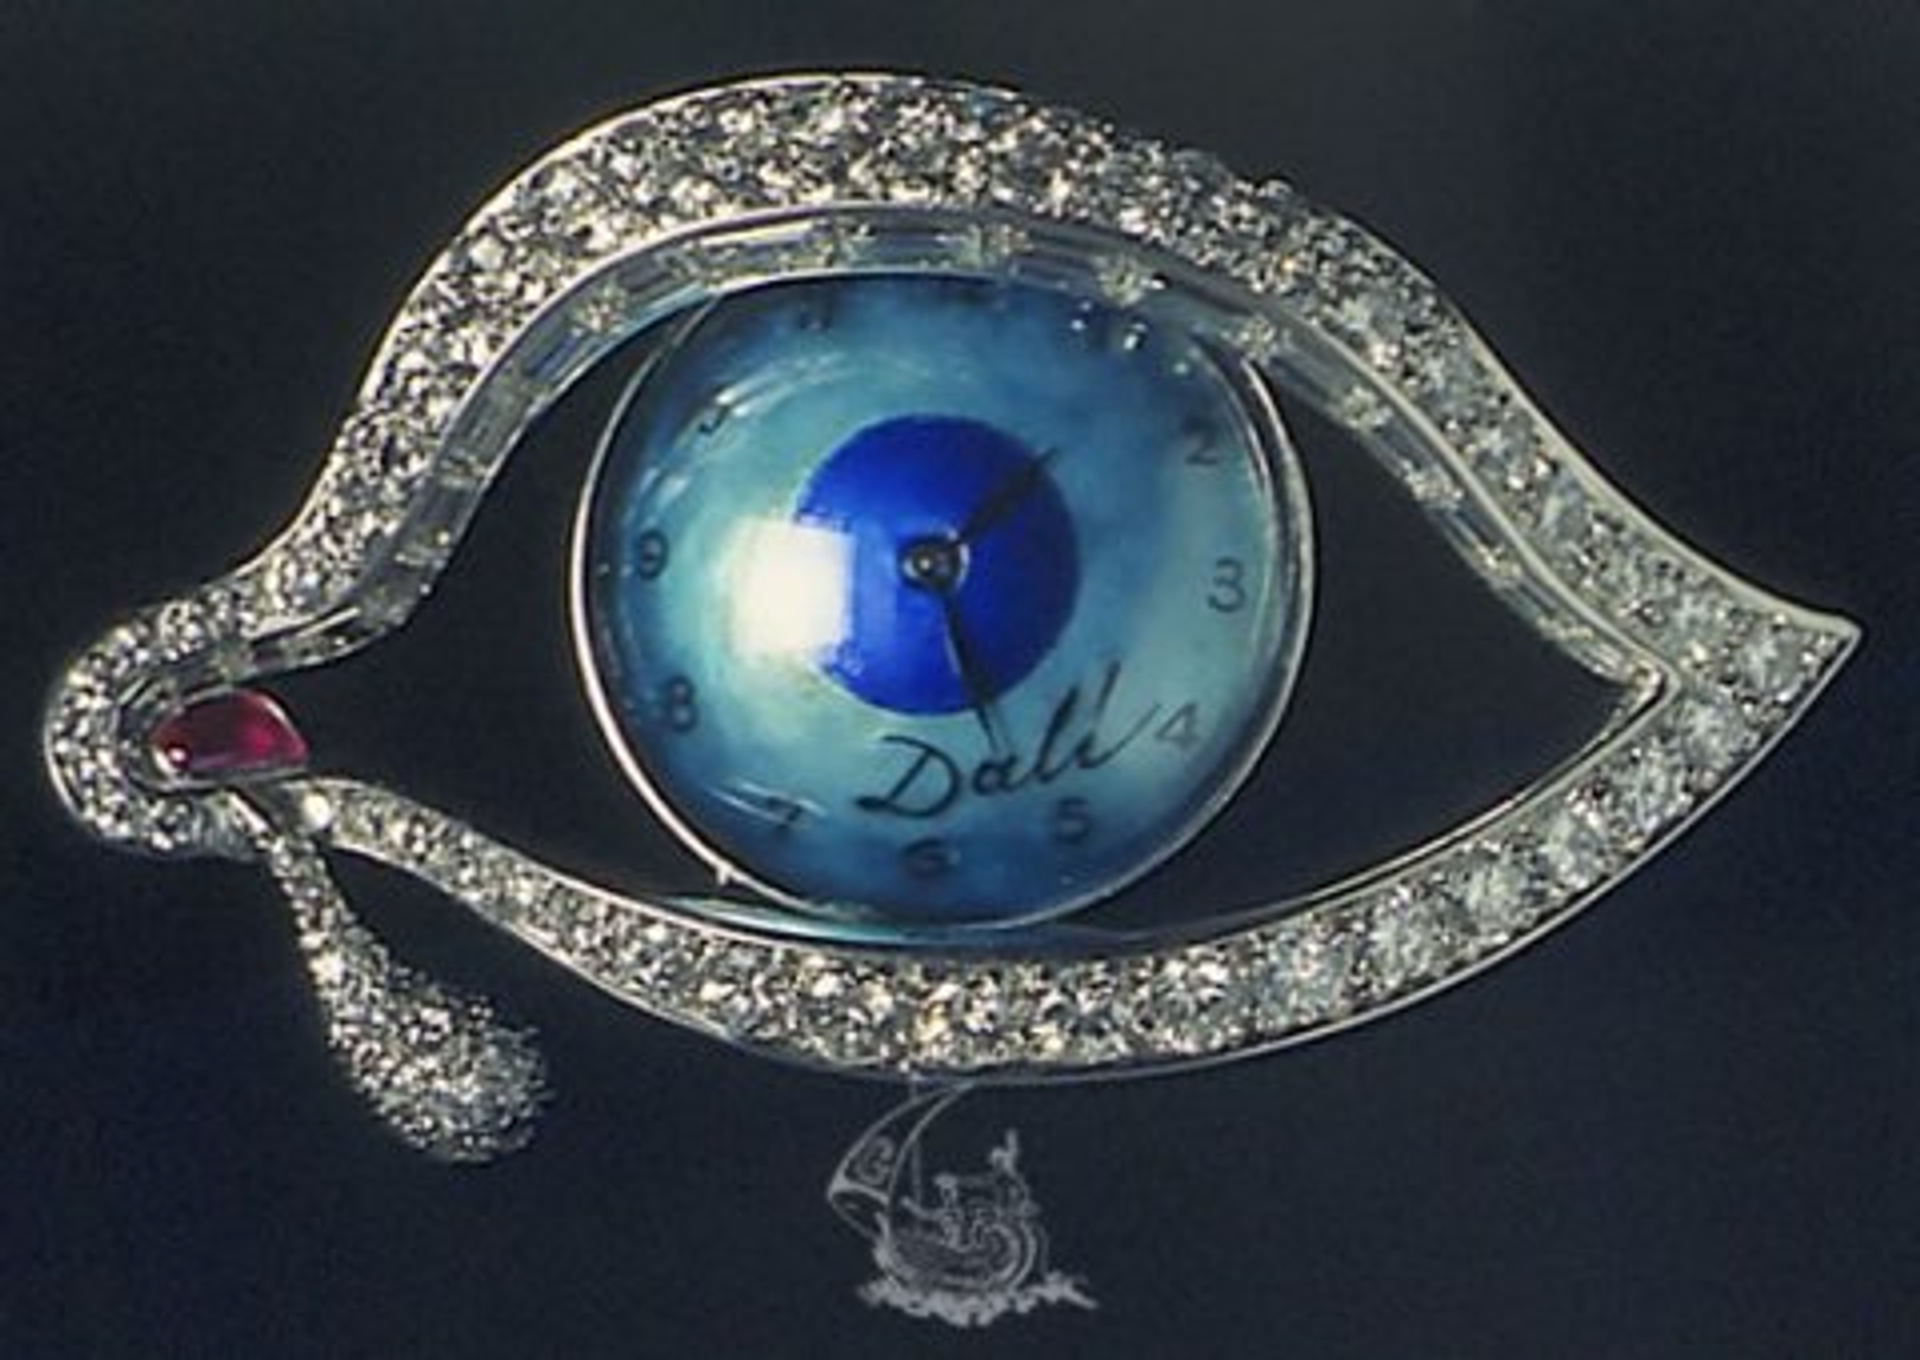 Salvador Dalí ‘s The Eye of Time. A watch in the style of a blue eye, surrounded by a diamond outline 